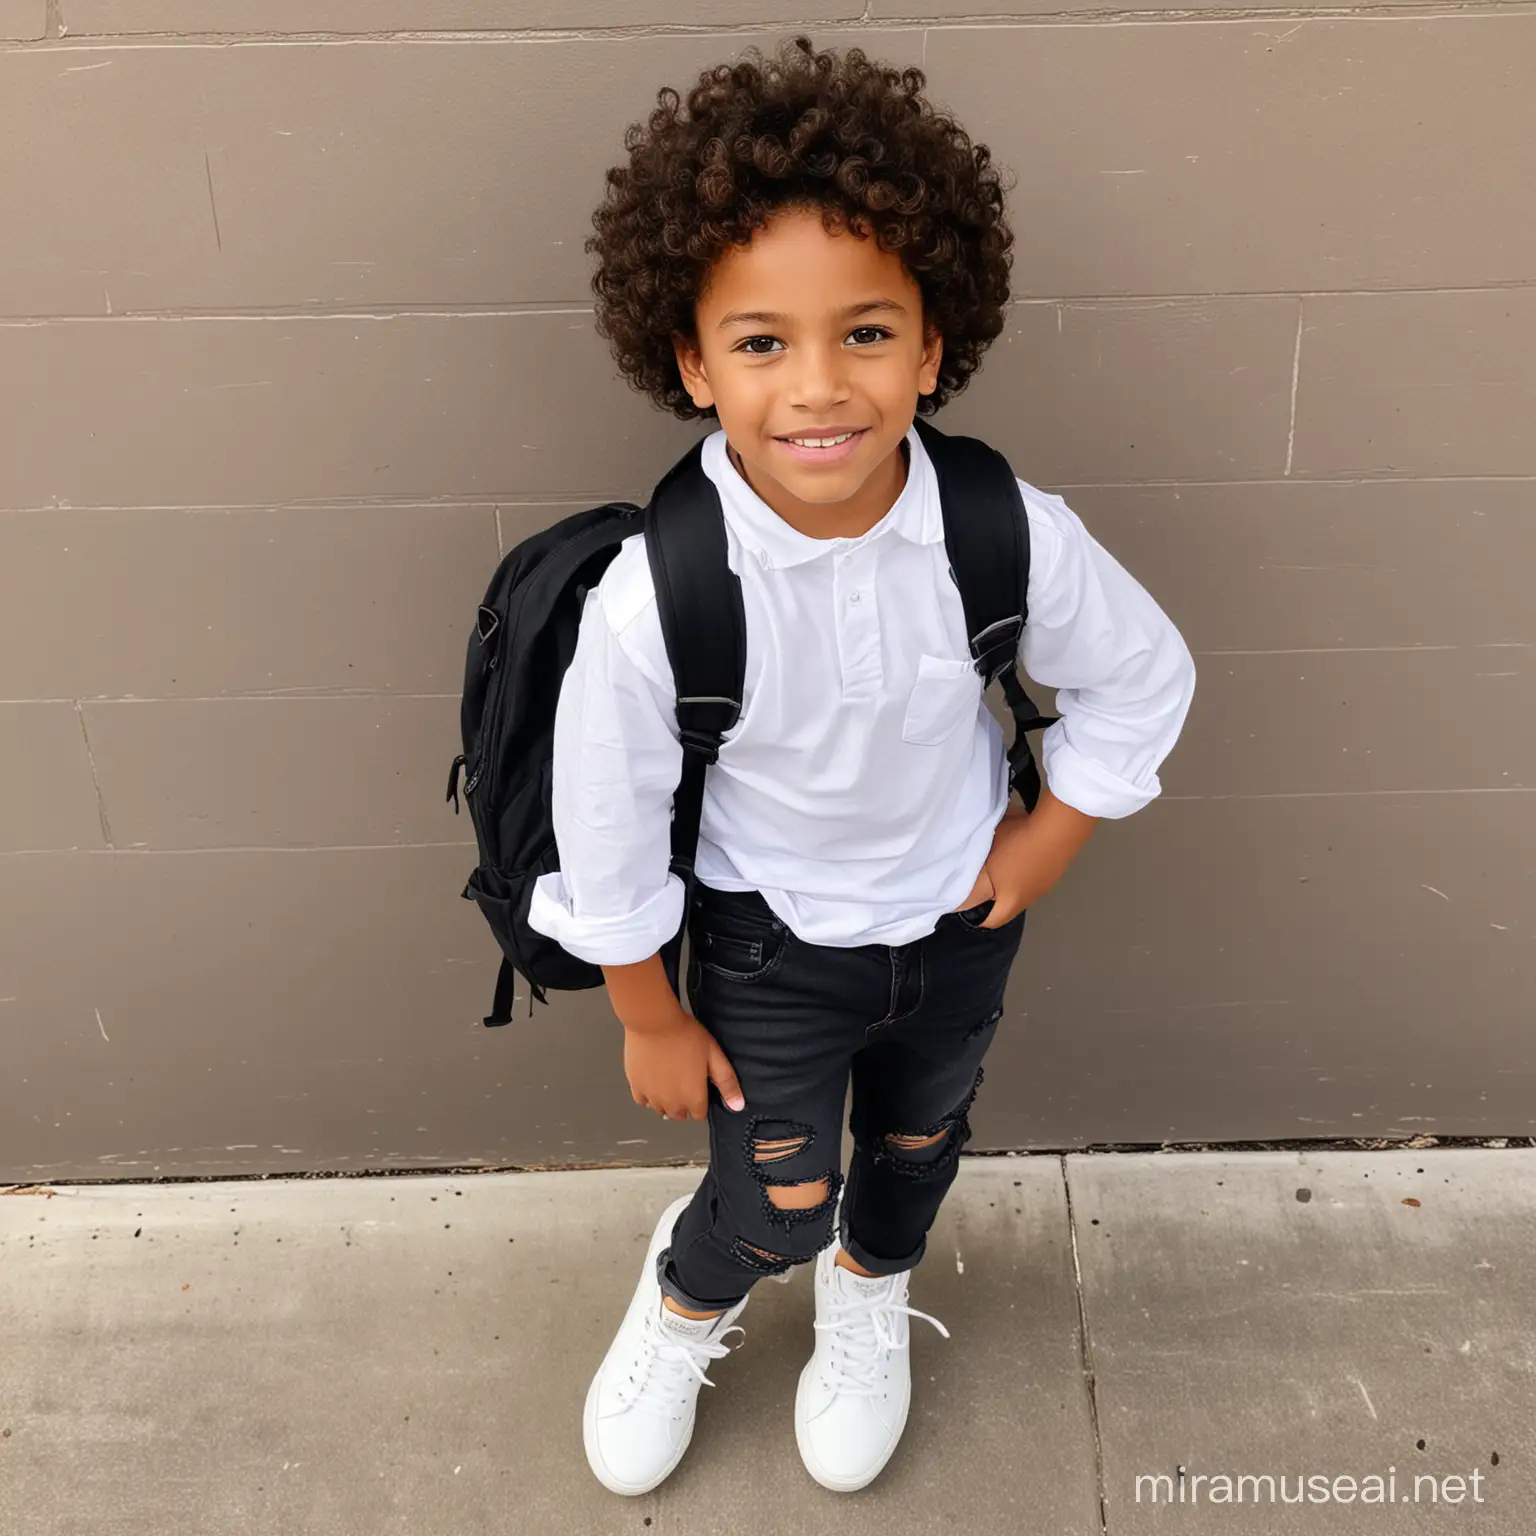 Adorable School Boy with Curly Hair and Backpack